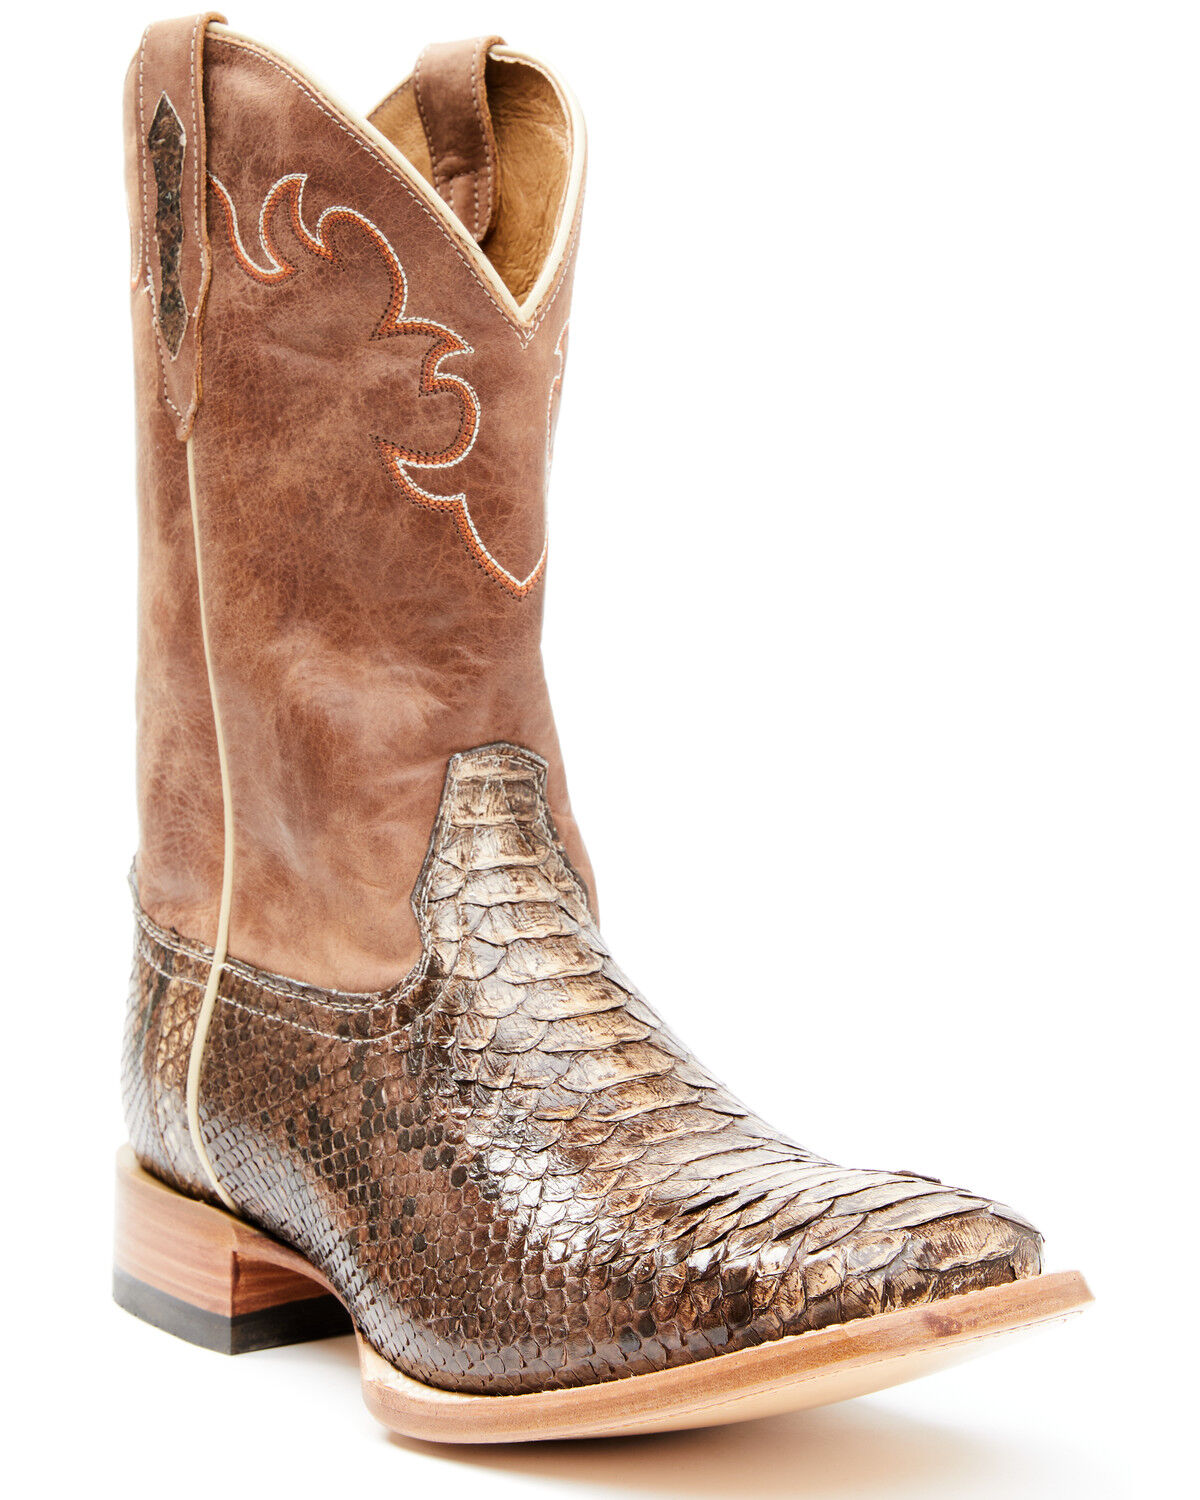 exotic cowboy boots for sale